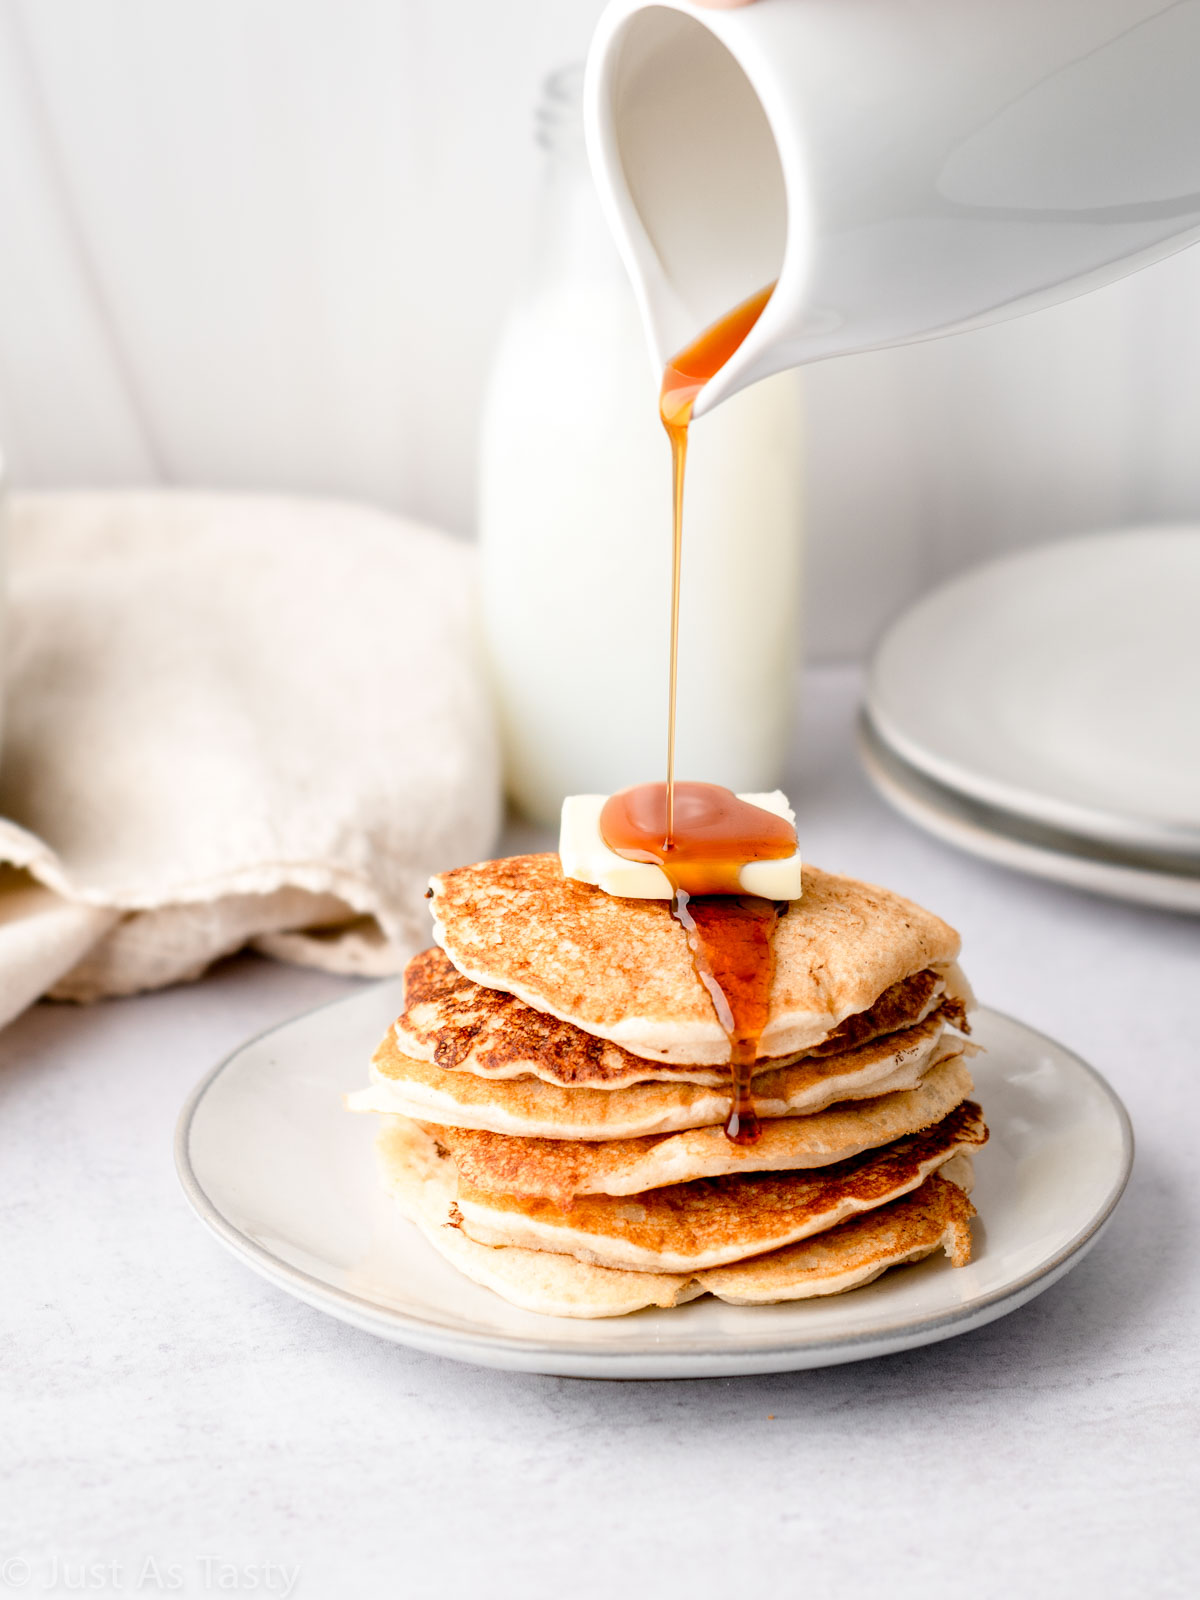 Stack of gluten free pancakes with syrup being poured on top.